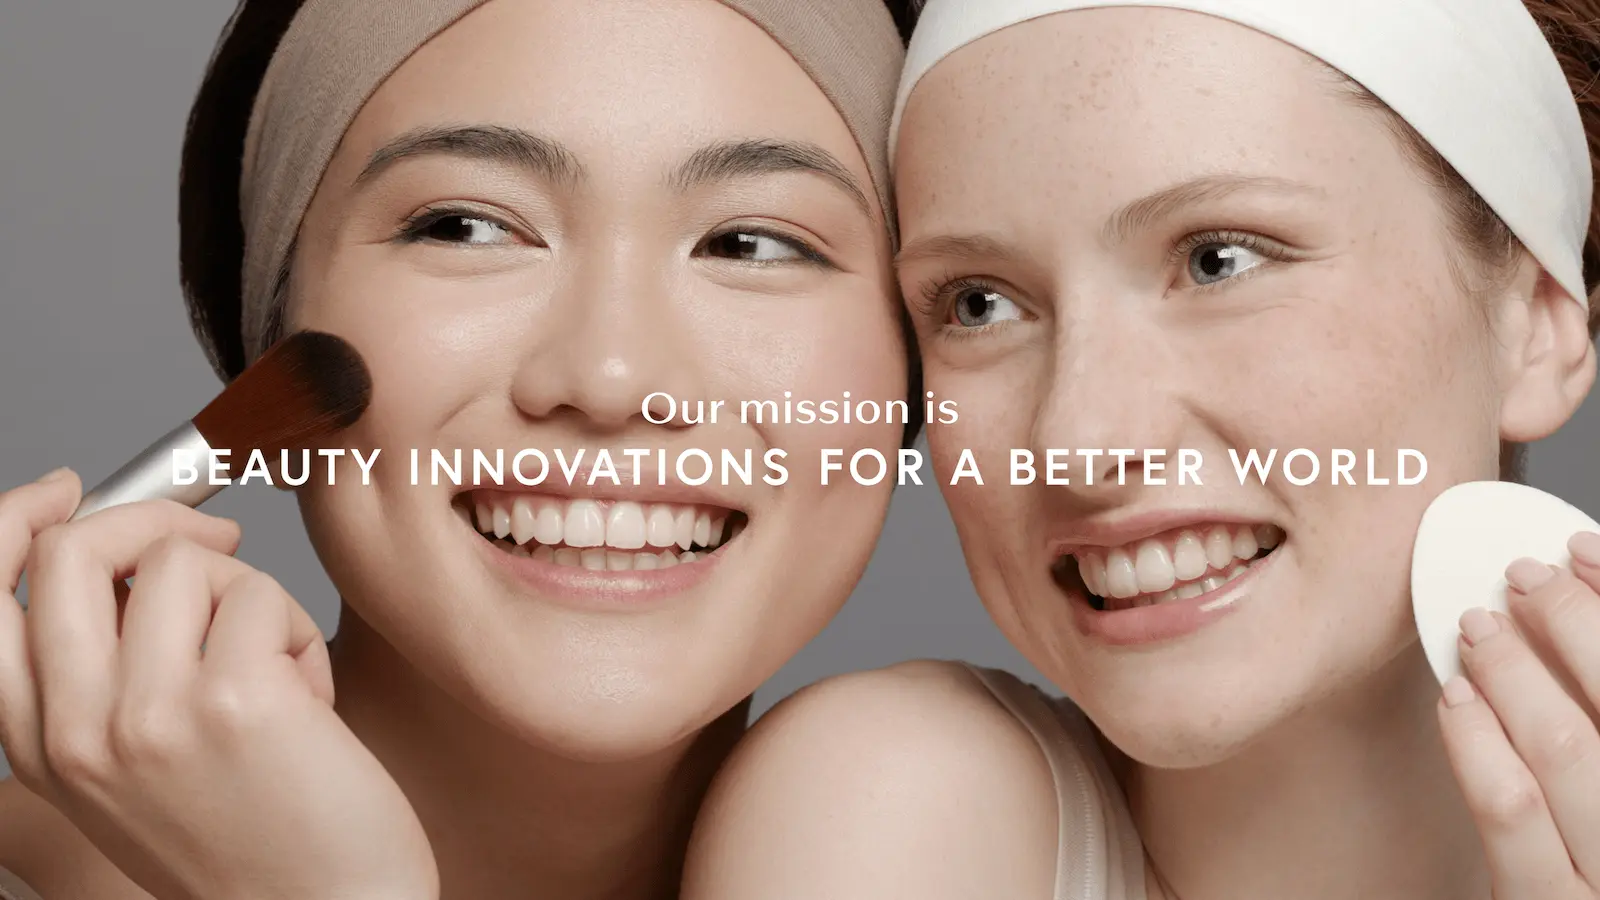 Our mission is BEAUTY INNOVATIONS FOR A BETTER WORLD